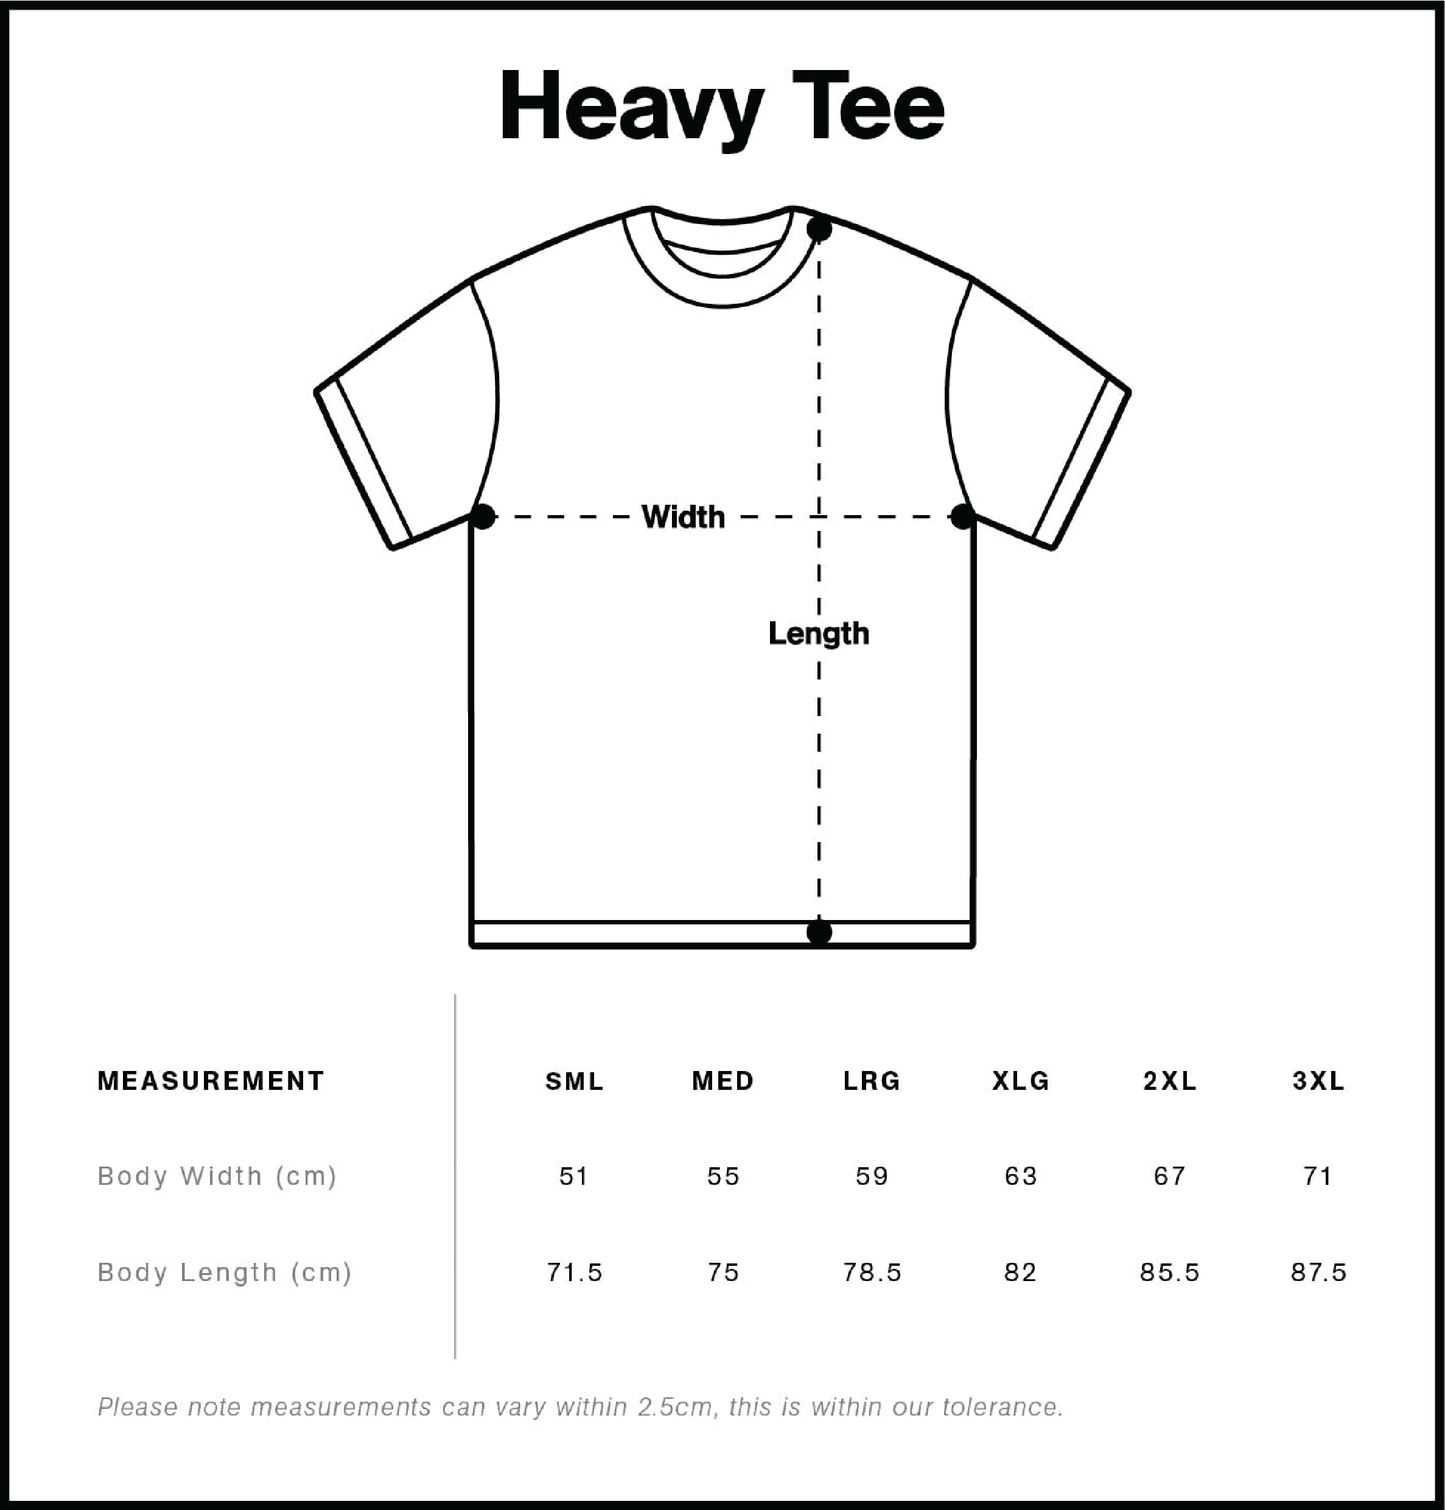 ARE WE THERE YET - HEAVY TEE